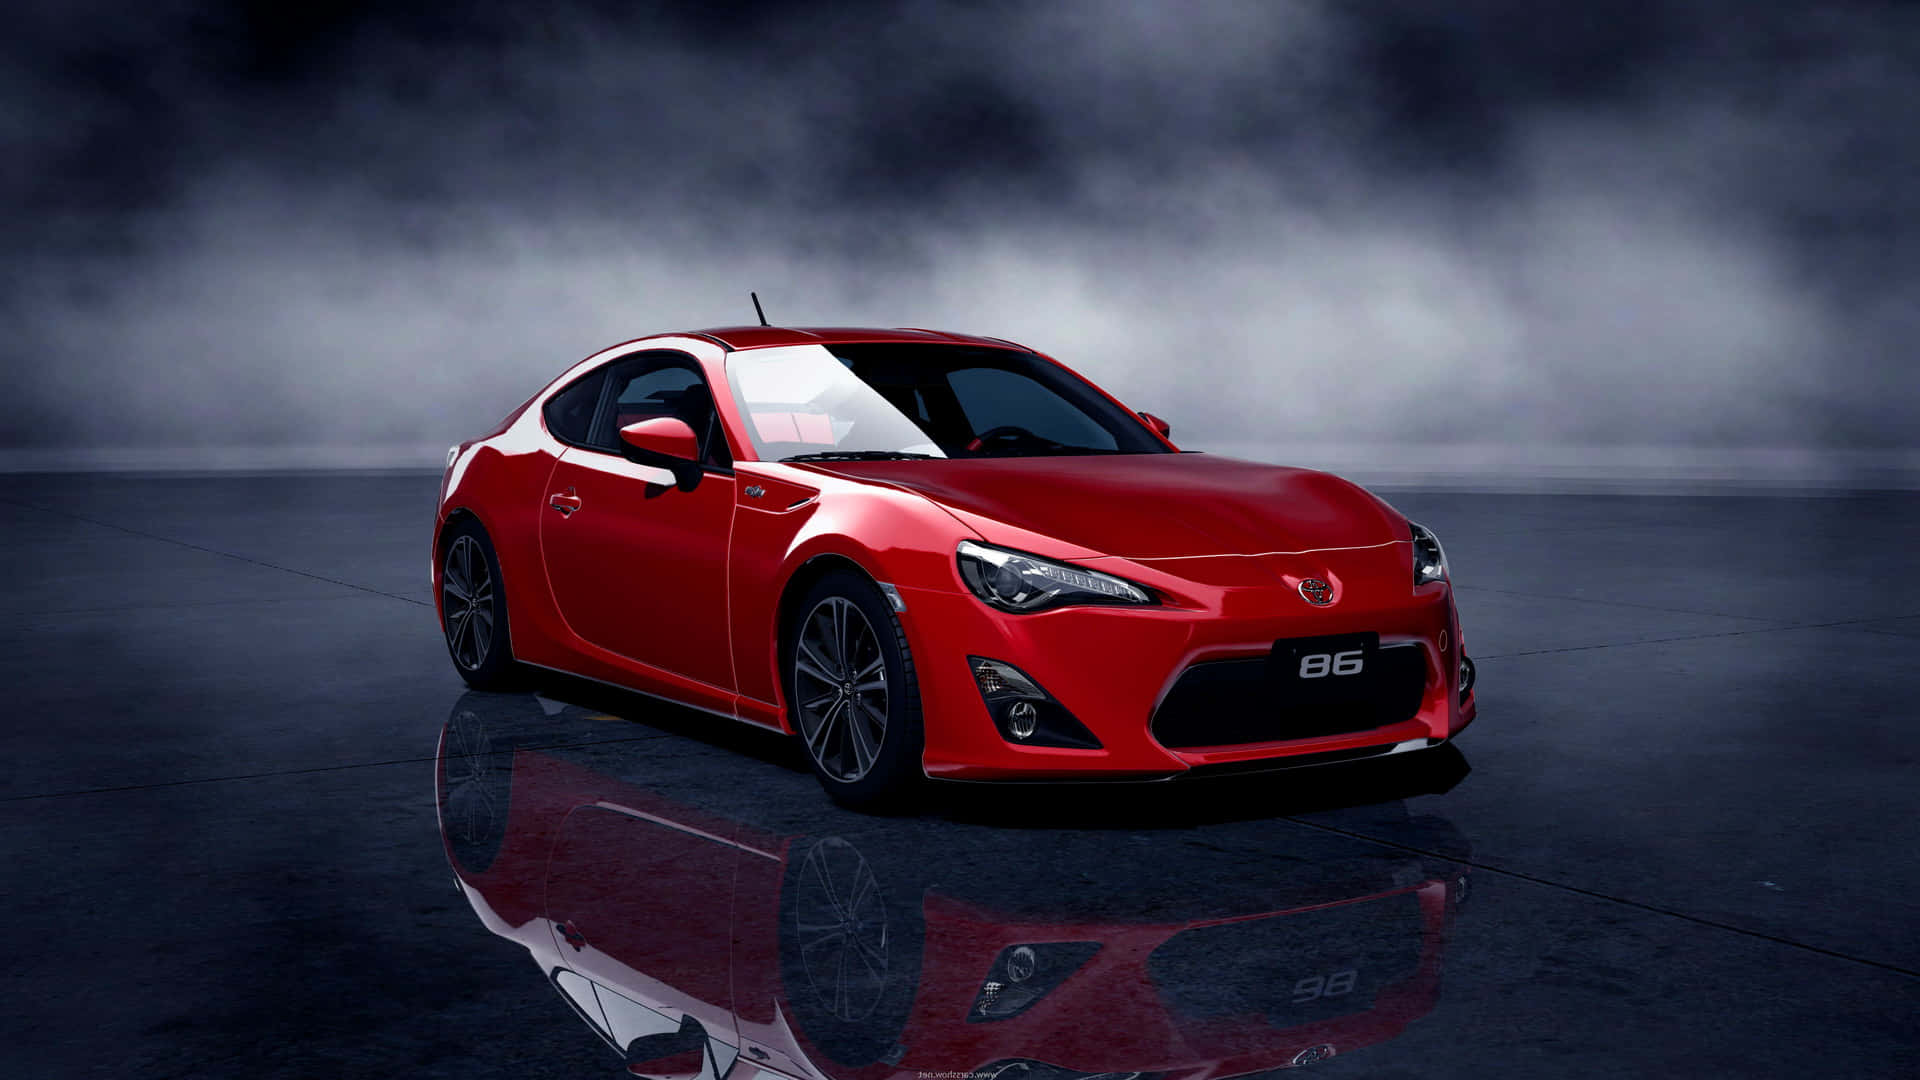 A Red Sports Car Is Shown In A Dark Room Wallpaper